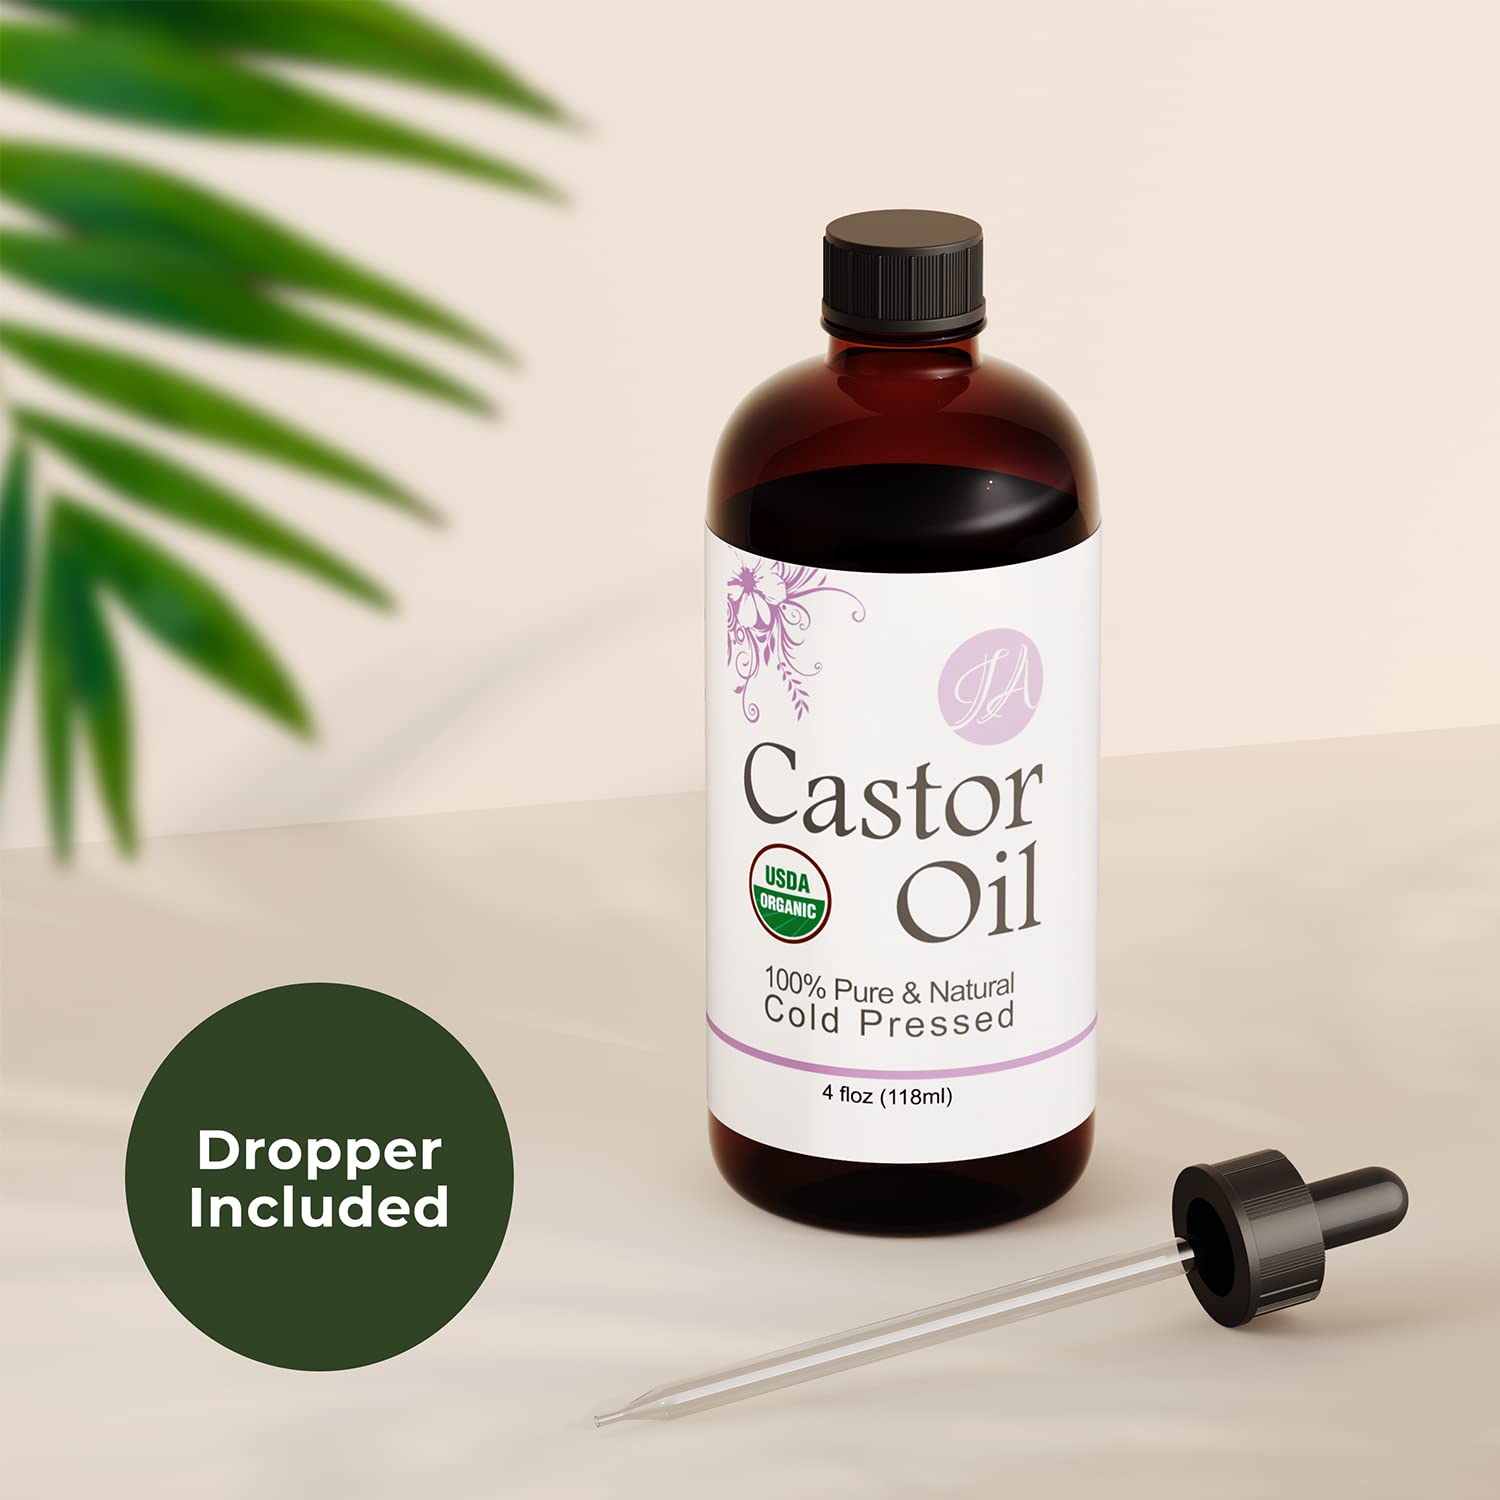 Castor Oil (Organic - 4oz) Pure & Natural - Cold Pressed - All-Natural Carrier Oil Solution for Lashes, Eyebrows, Hair, & More!